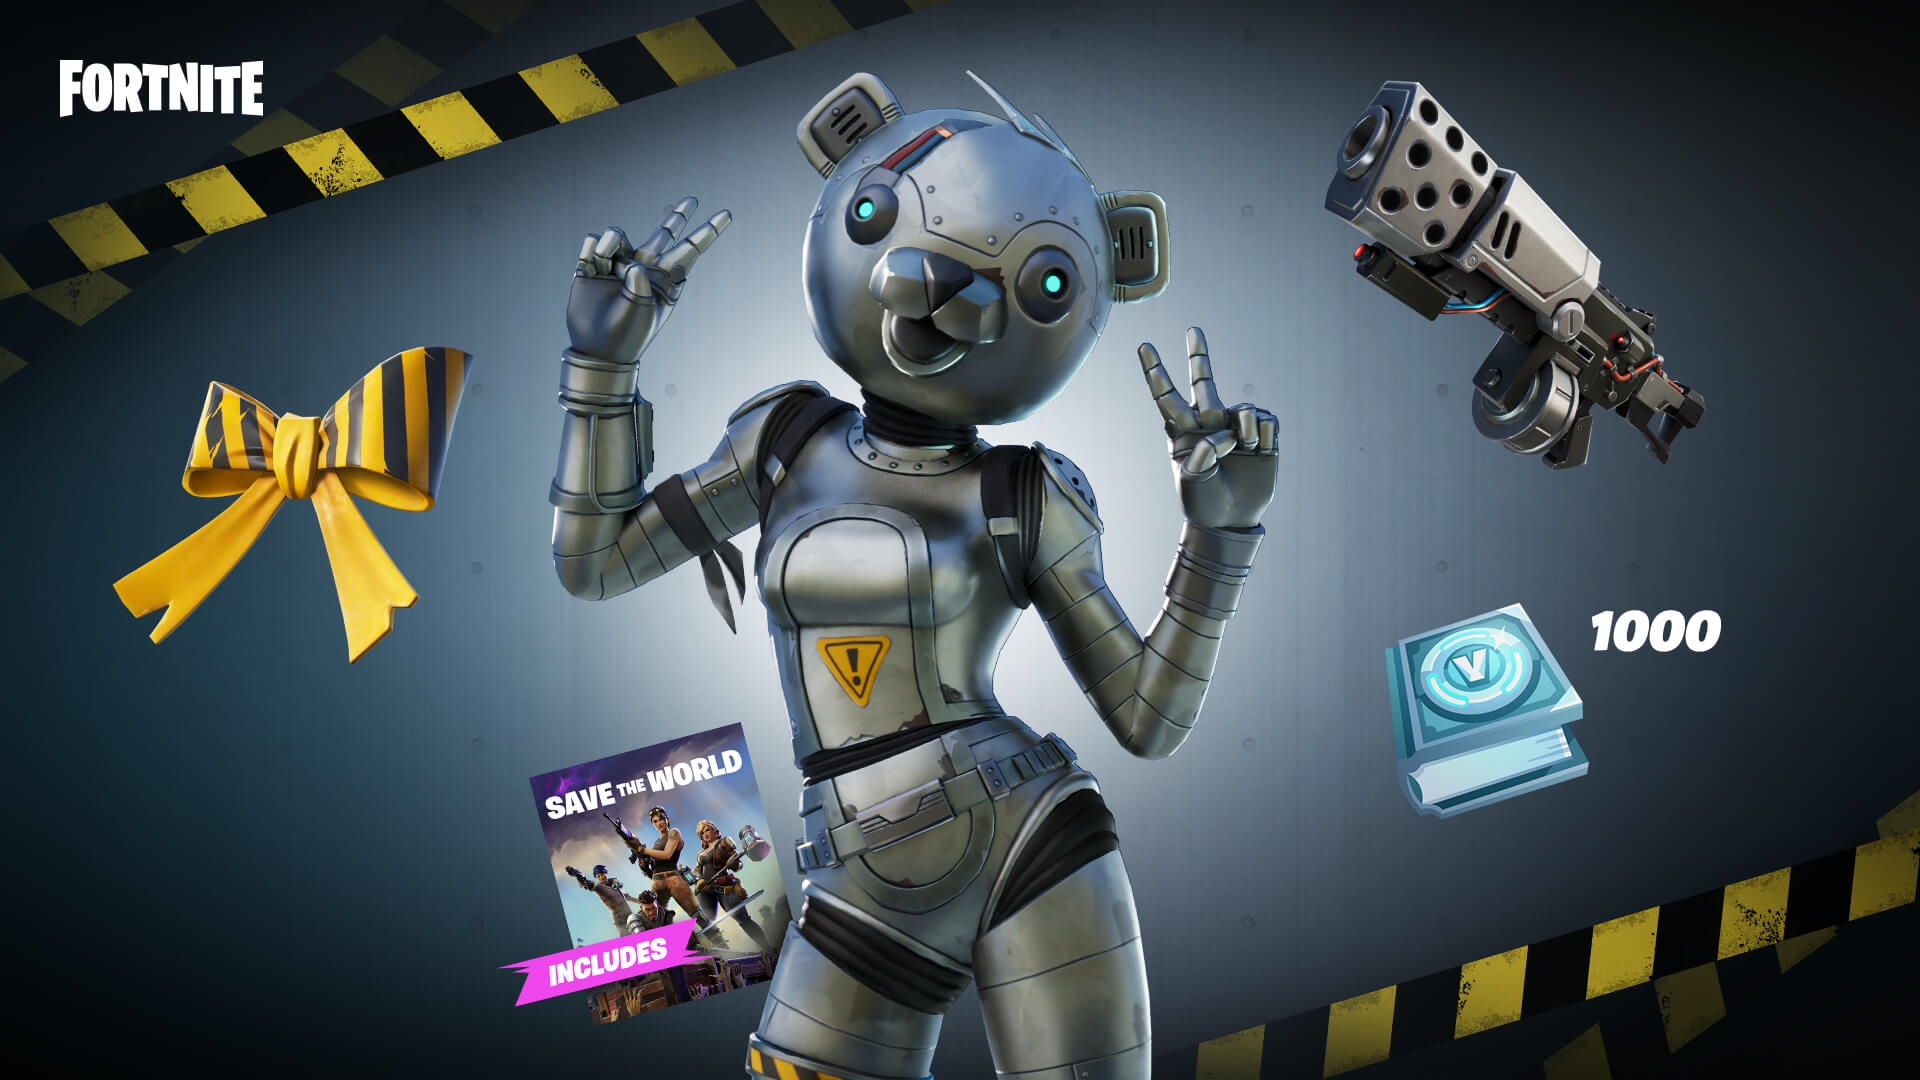 'Fortnite: Save the World' will shut down on macOS September 23rd | DeviceDaily.com